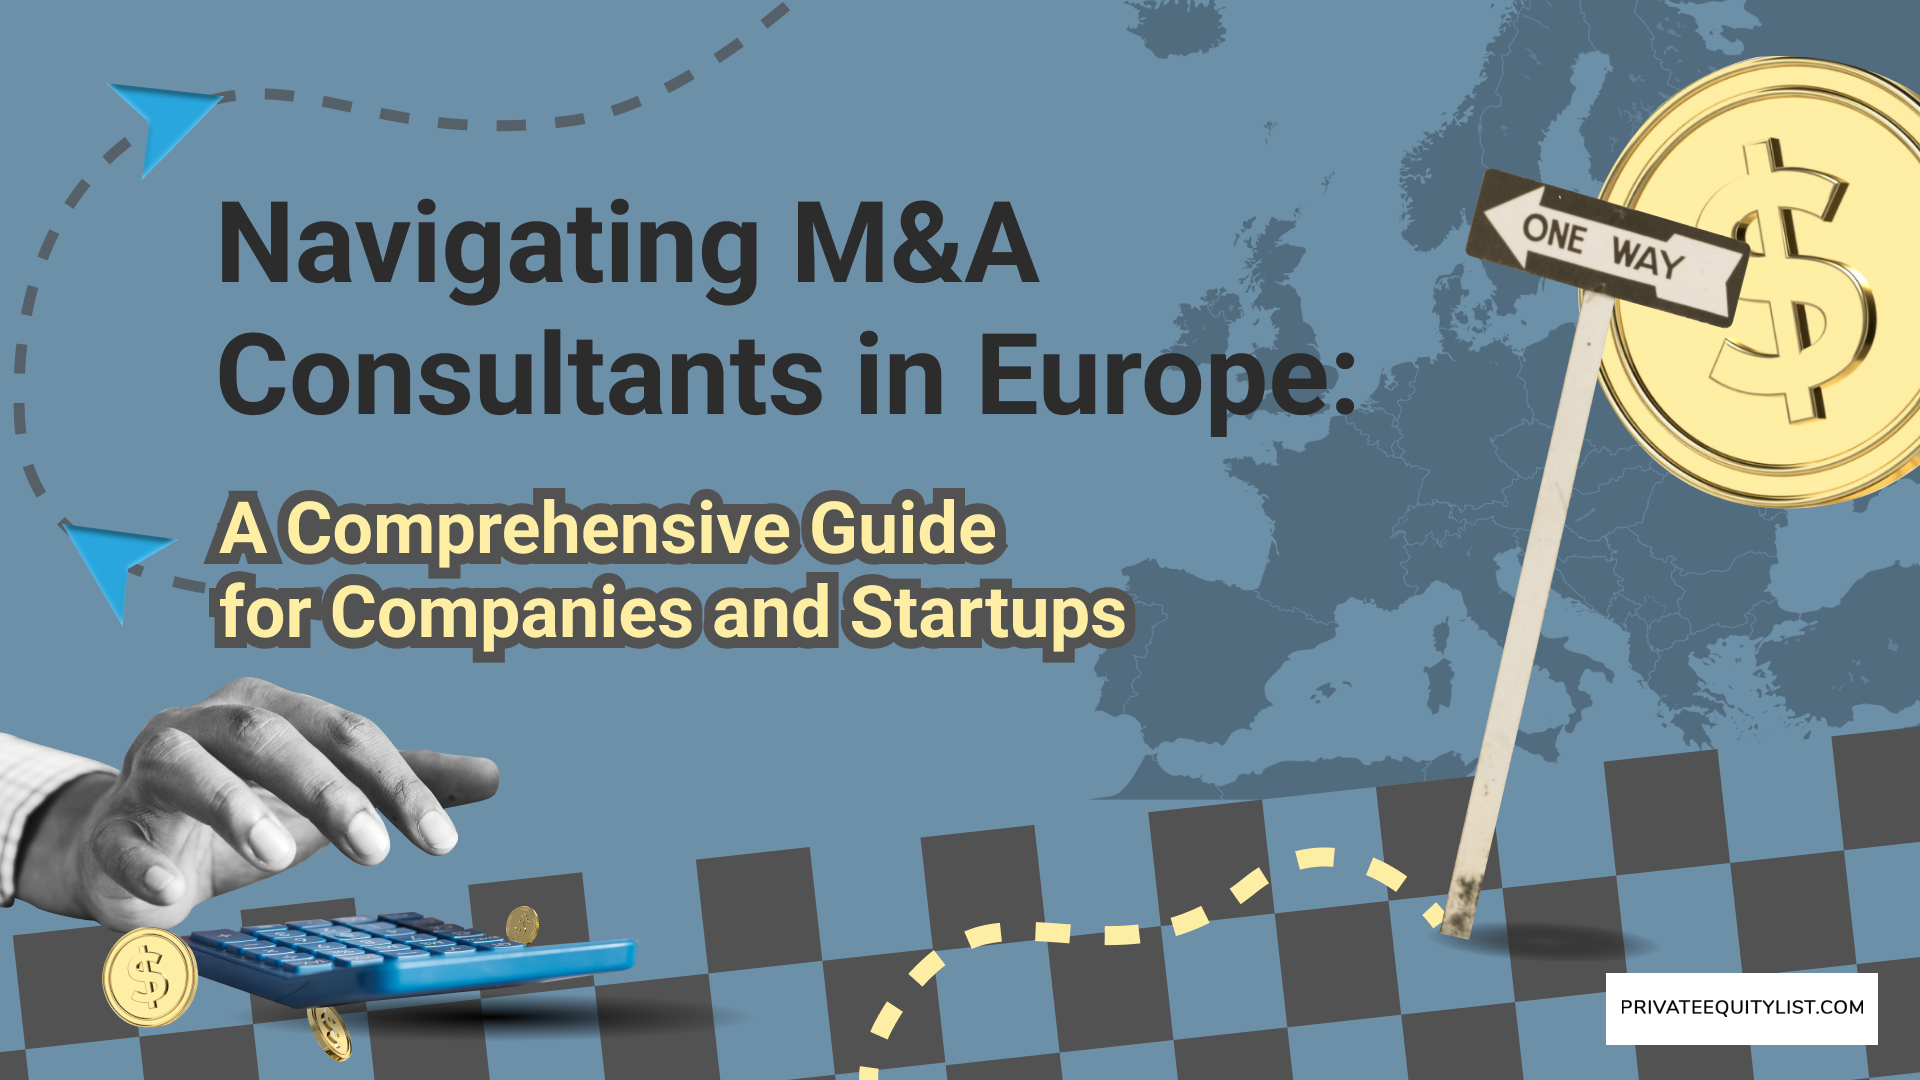 Navigating M&A Consultants in Europe: A Comprehensive Guide for Companies and Startups